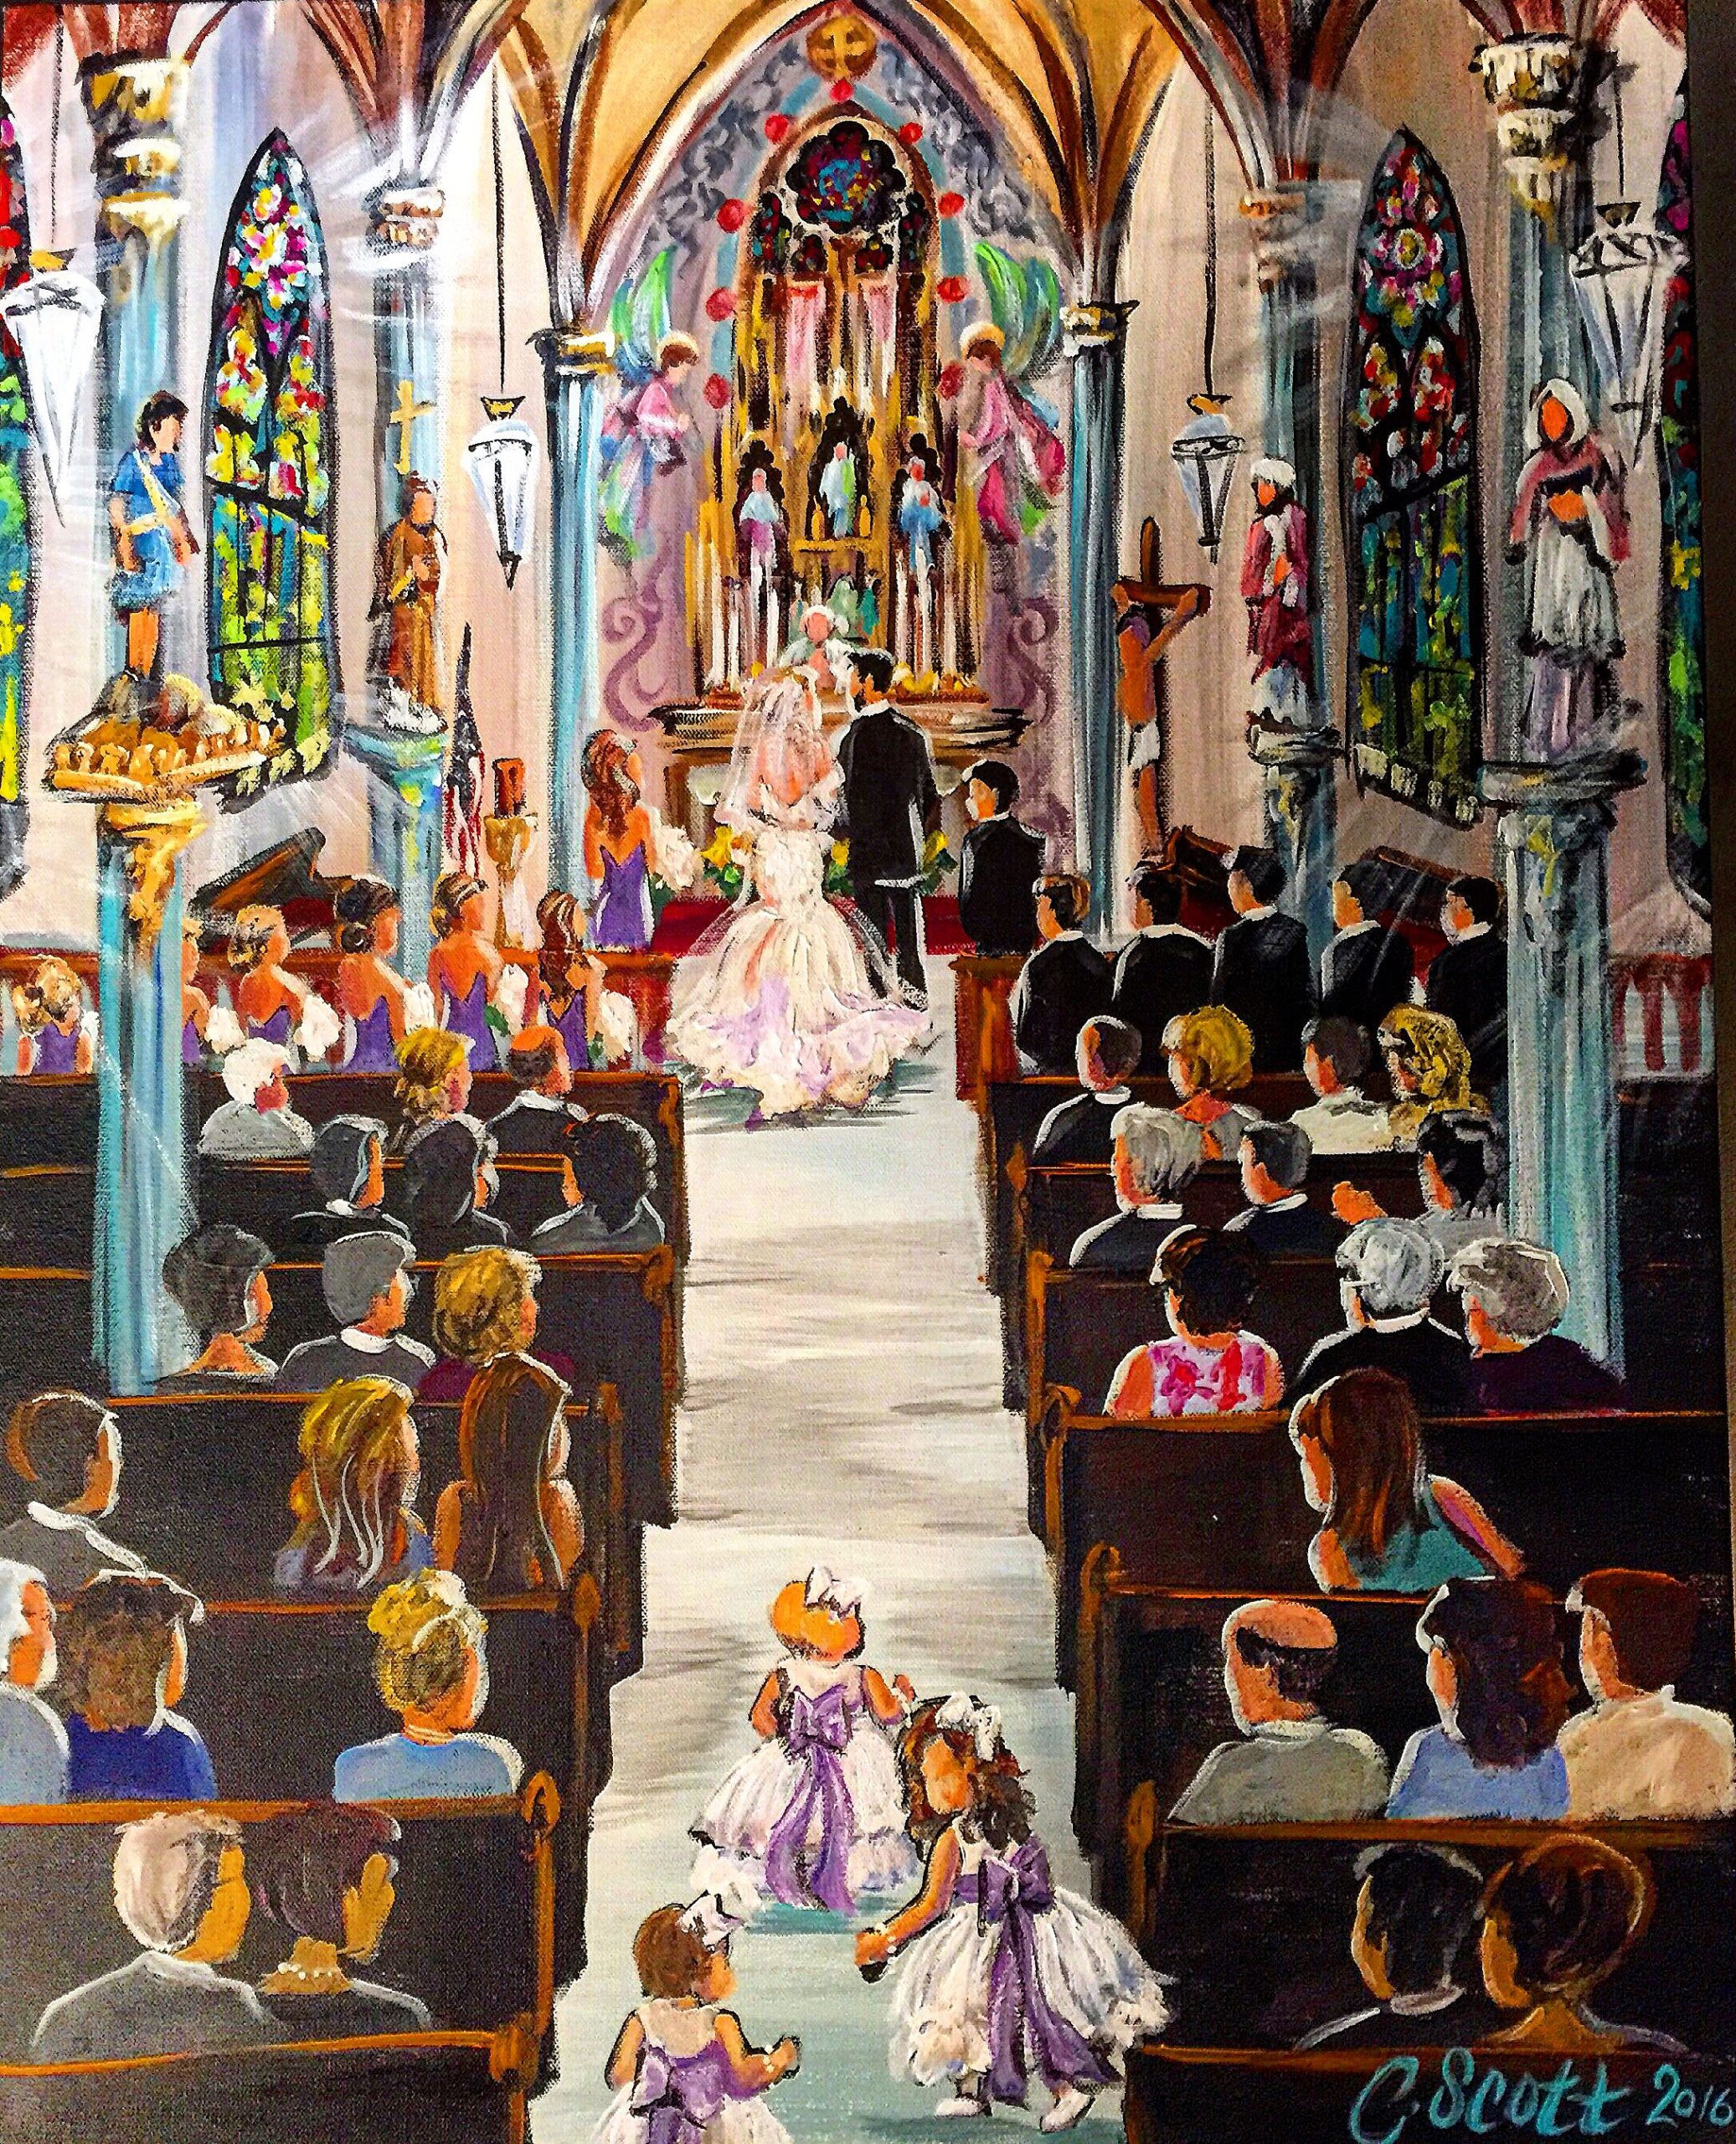 Wedding ceremony, painted from photos and presented as a gift from him to her for their first married Christmas, 24x36 canvas